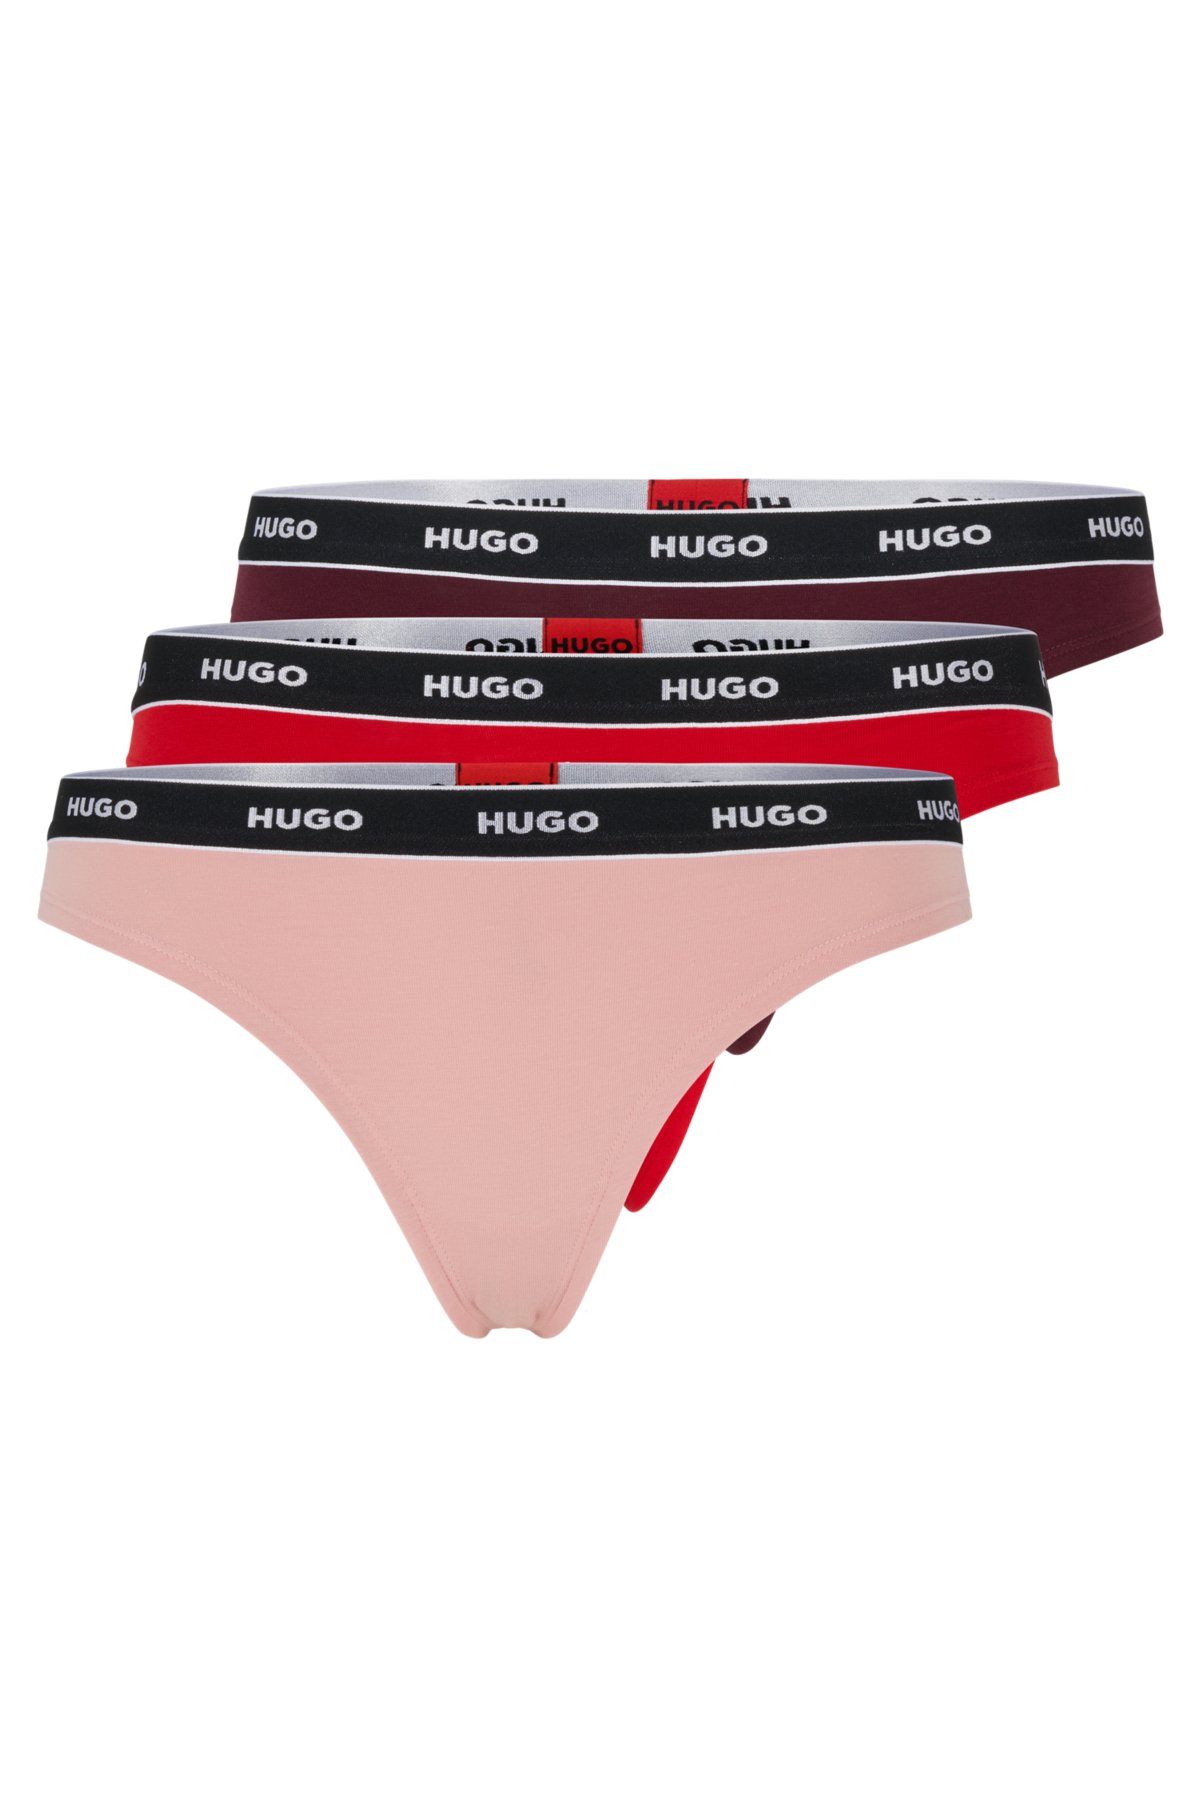 HUGO - briefs stretch-cotton with thong Three-pack logos of